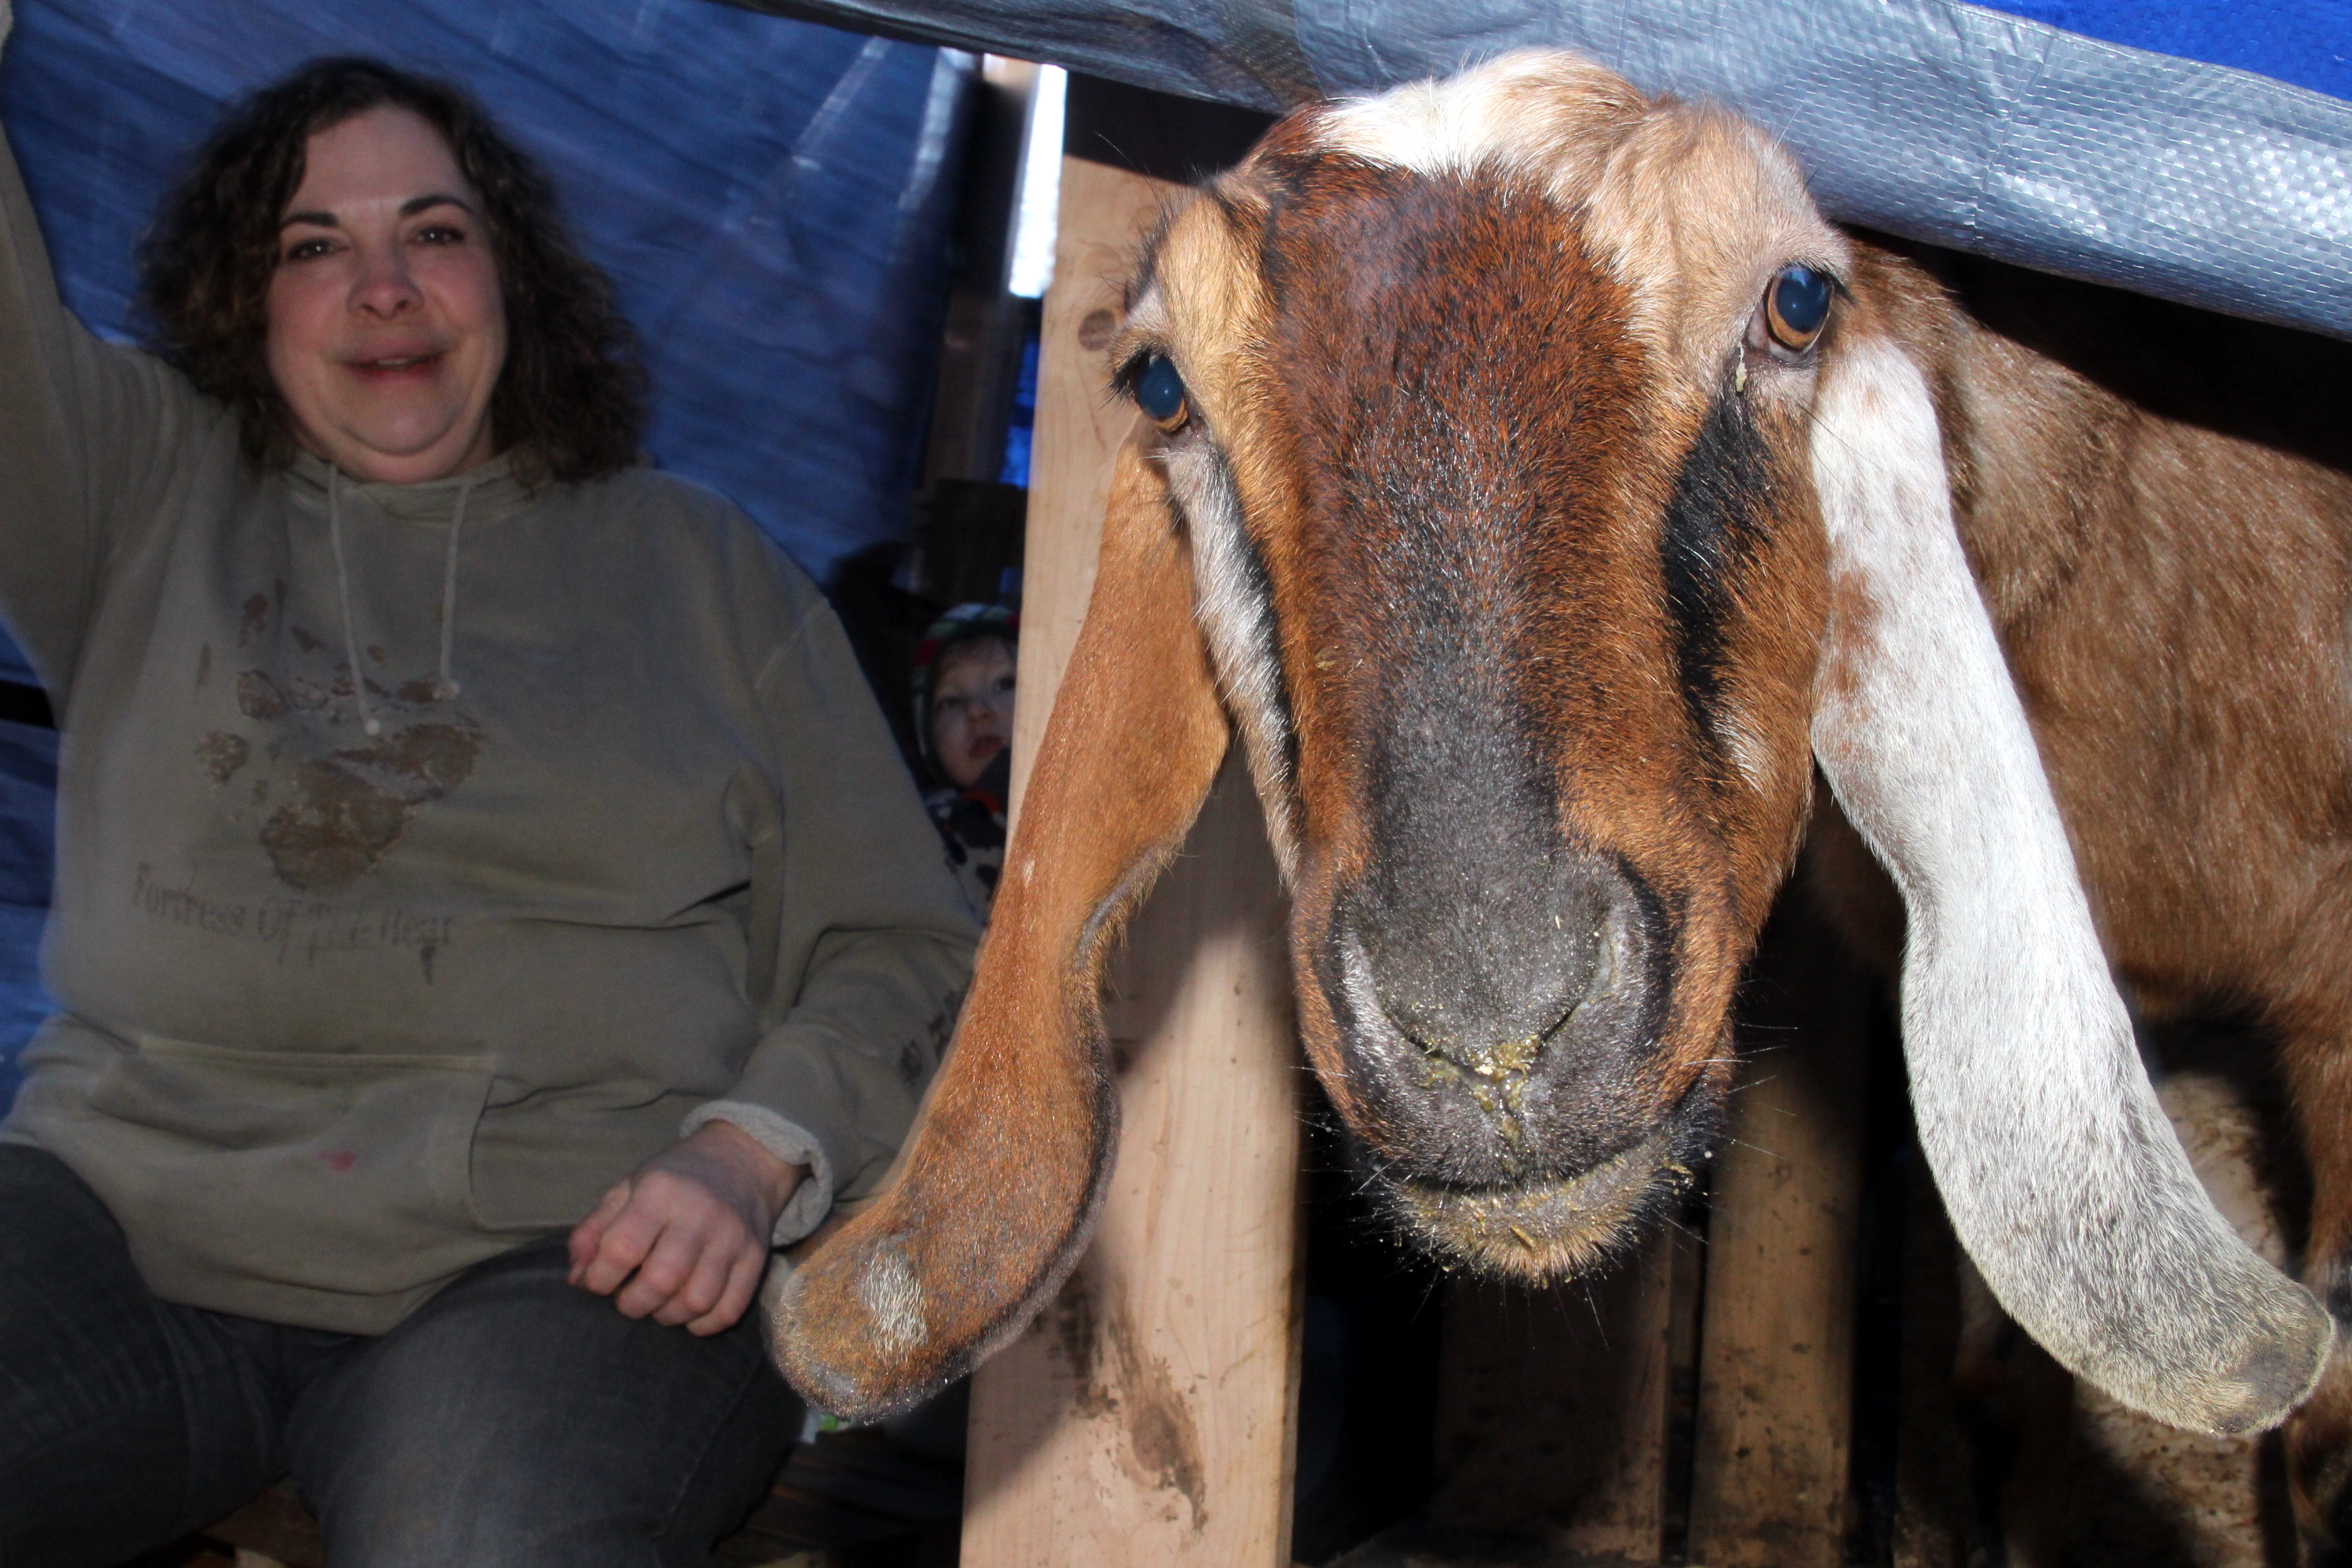 Milly, a milk goat from Wrangell, turned to sniff my breathe. "That's how they get to know you," Daniels said. There are fifteen does in the goat herd. (Emily Kwong, KCAW - Sitka)